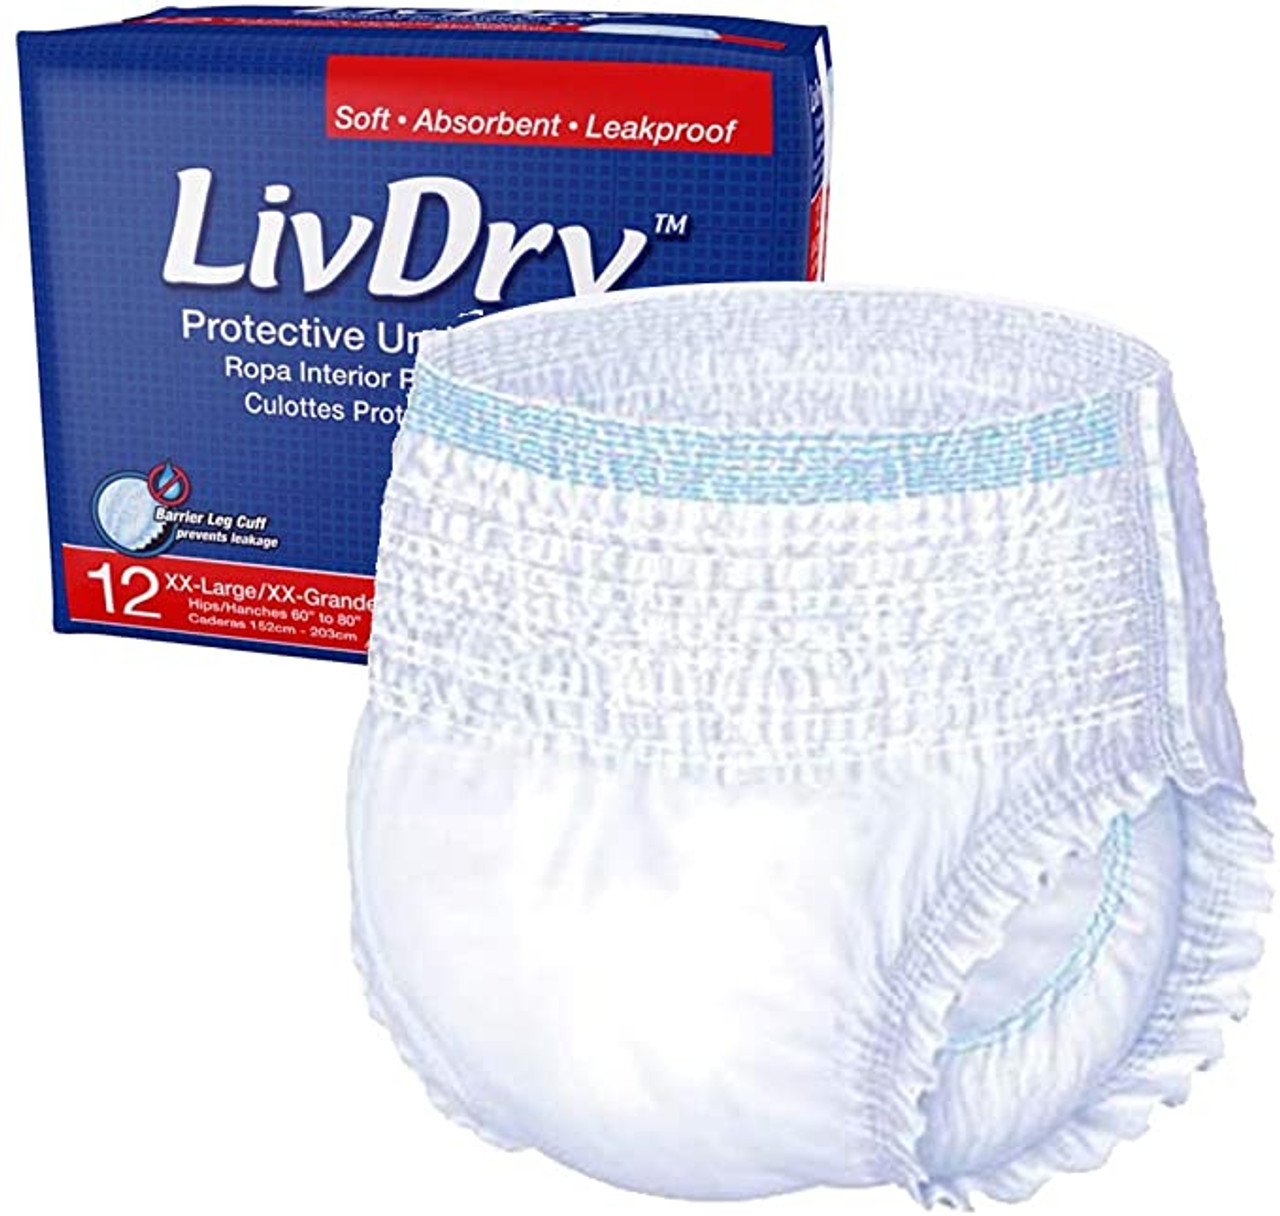 How to Buy Adult Diapers and Briefs: 11 Steps (with Pictures)